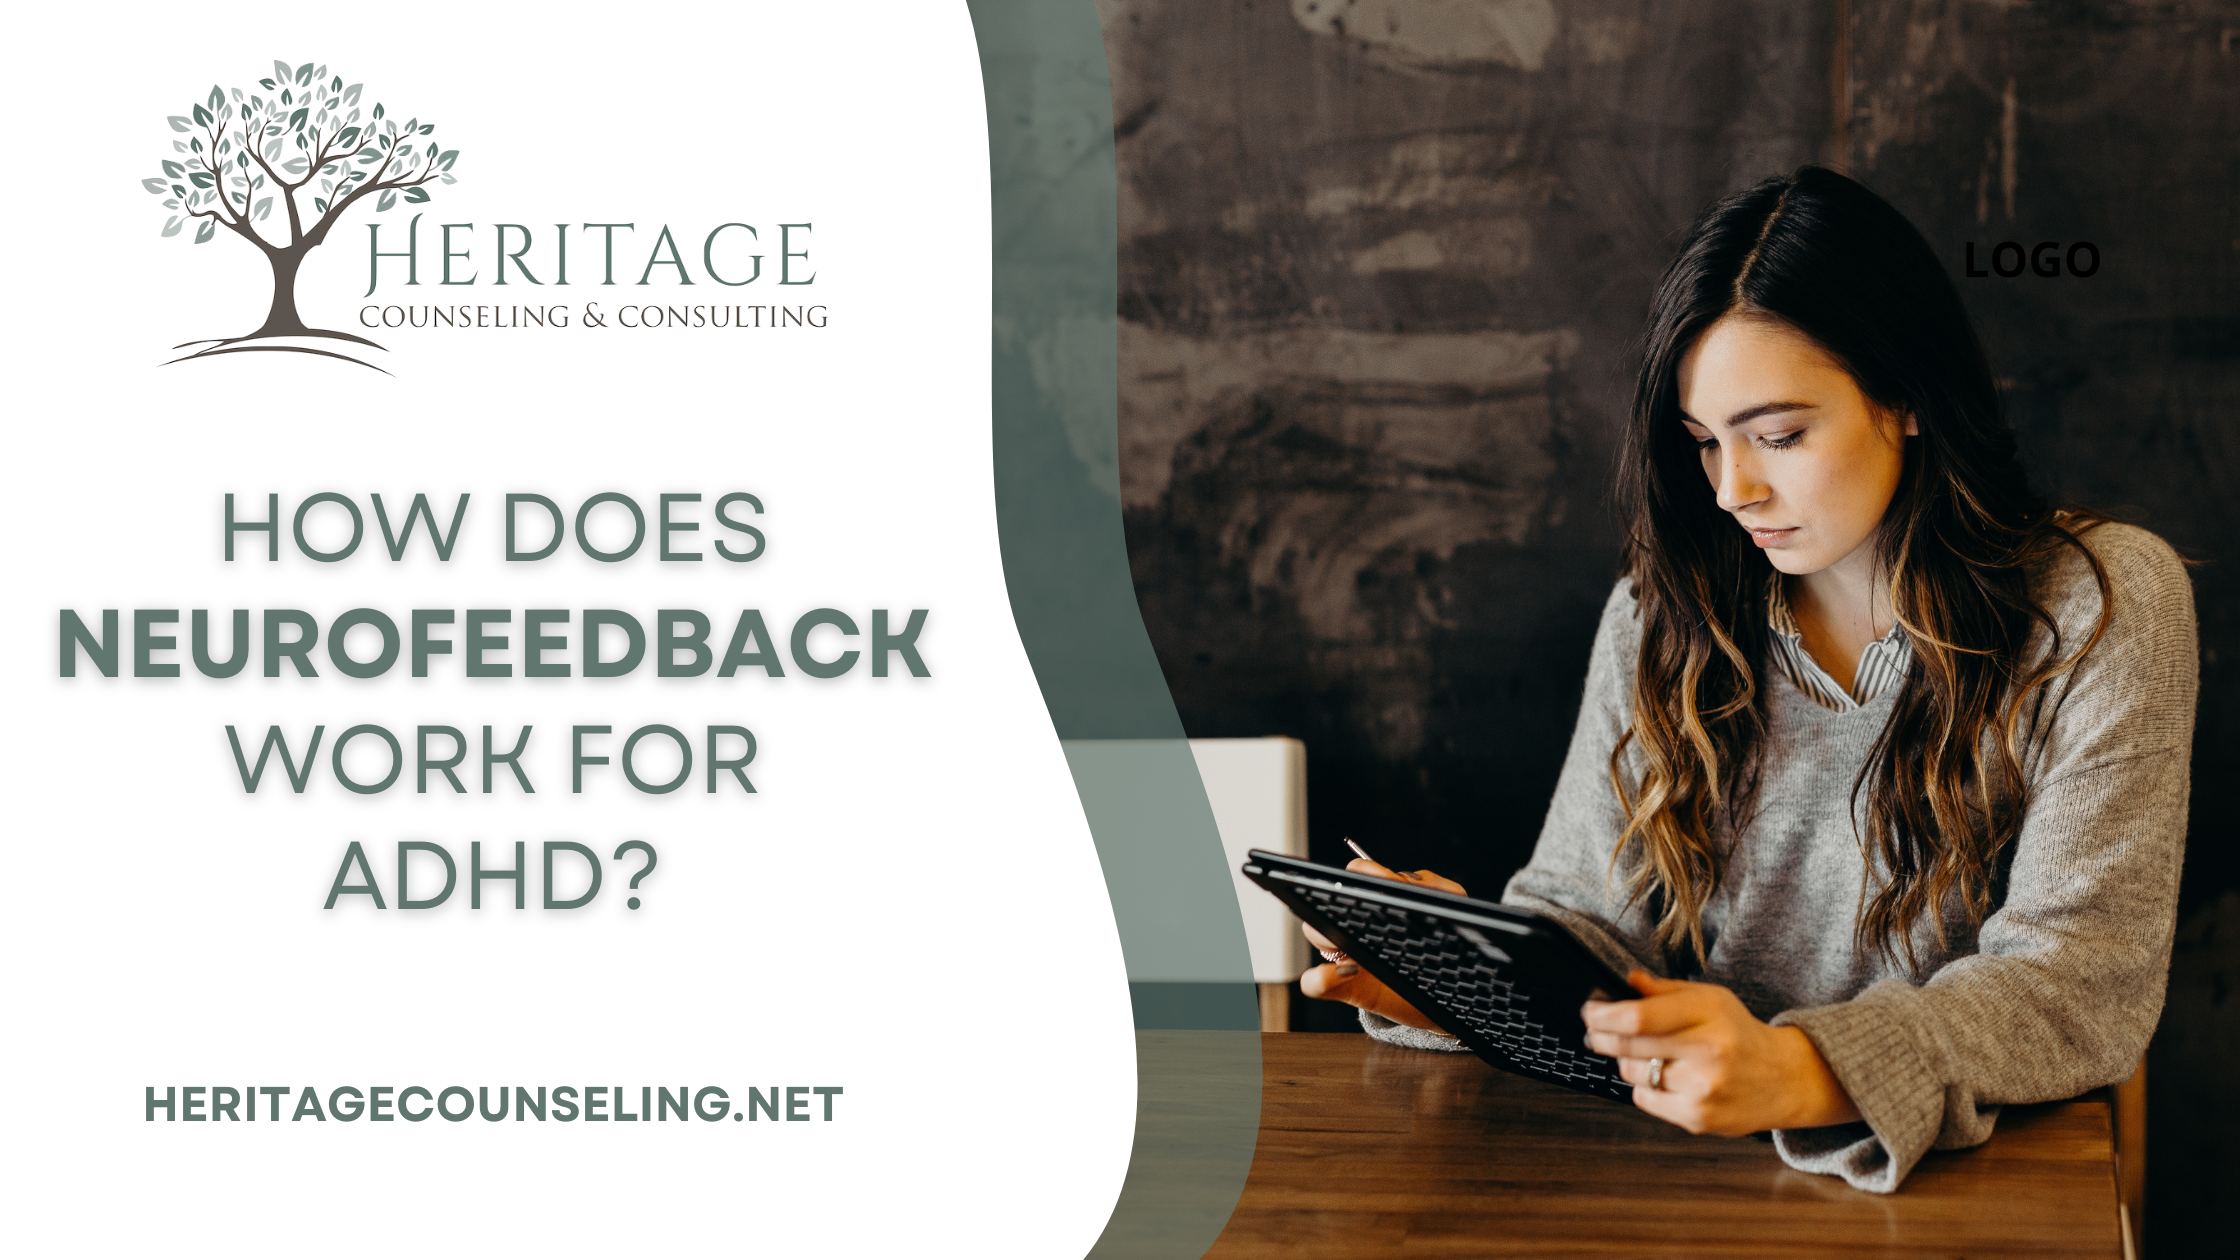 How does Neurofeedback work for ADHD?